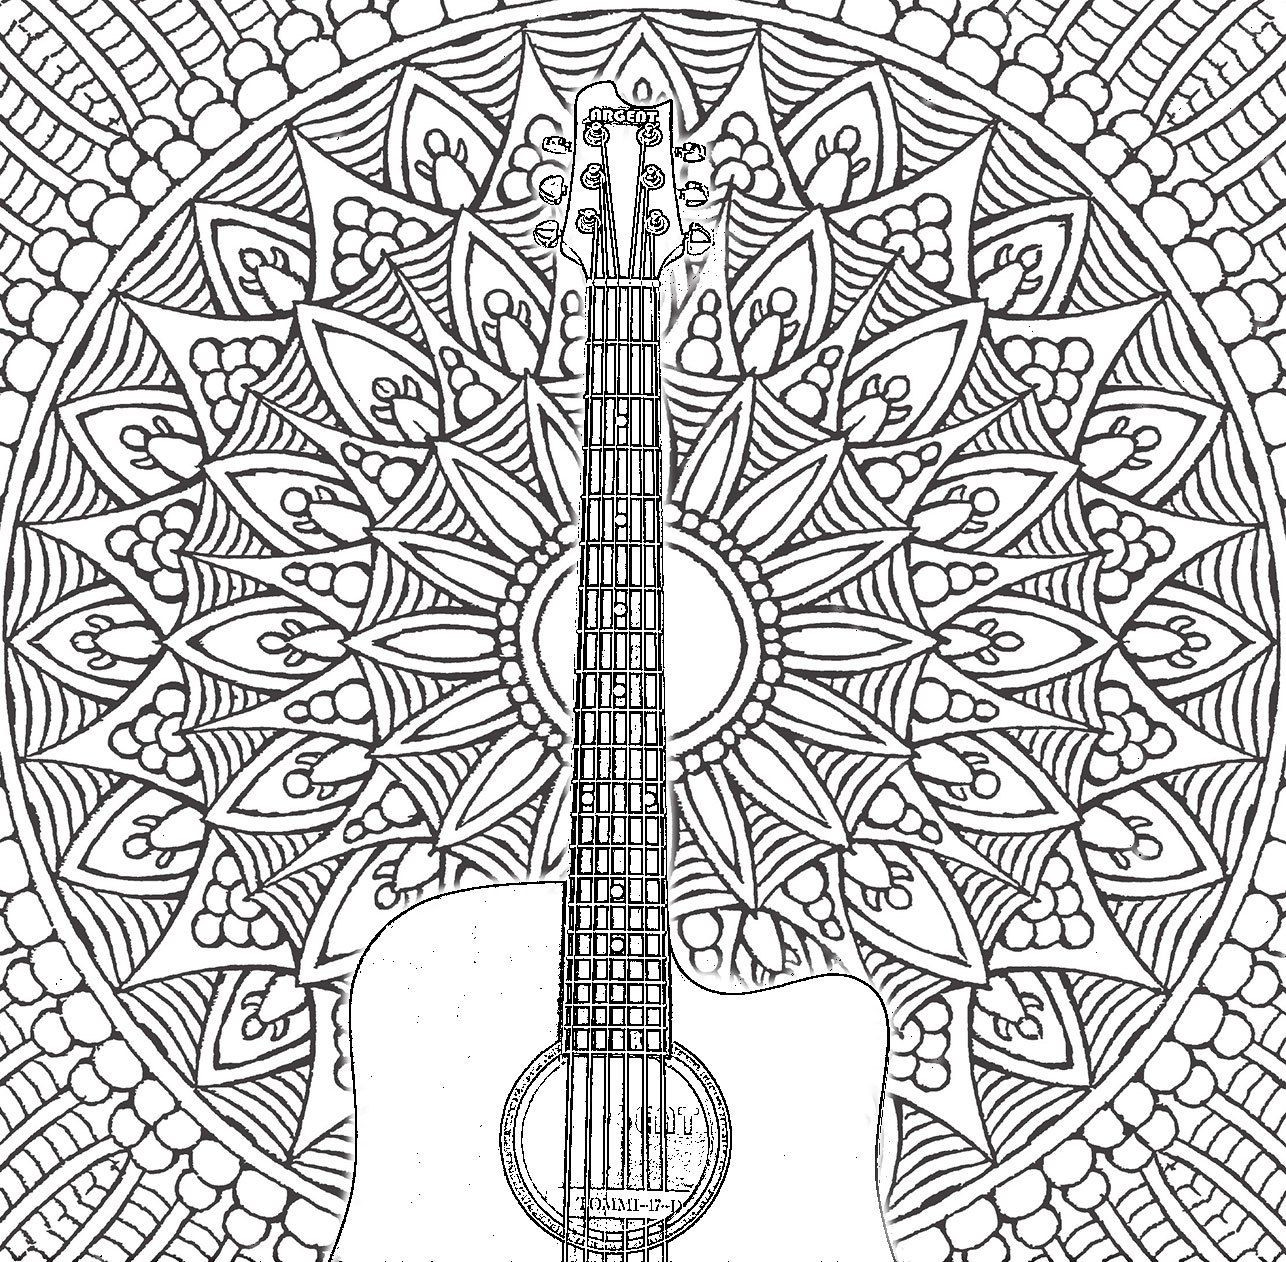 Guitar Coloring Pages For Adults
 Pin by FOSTER GINGER on COLORING BOOK PIANOS MUSICAL